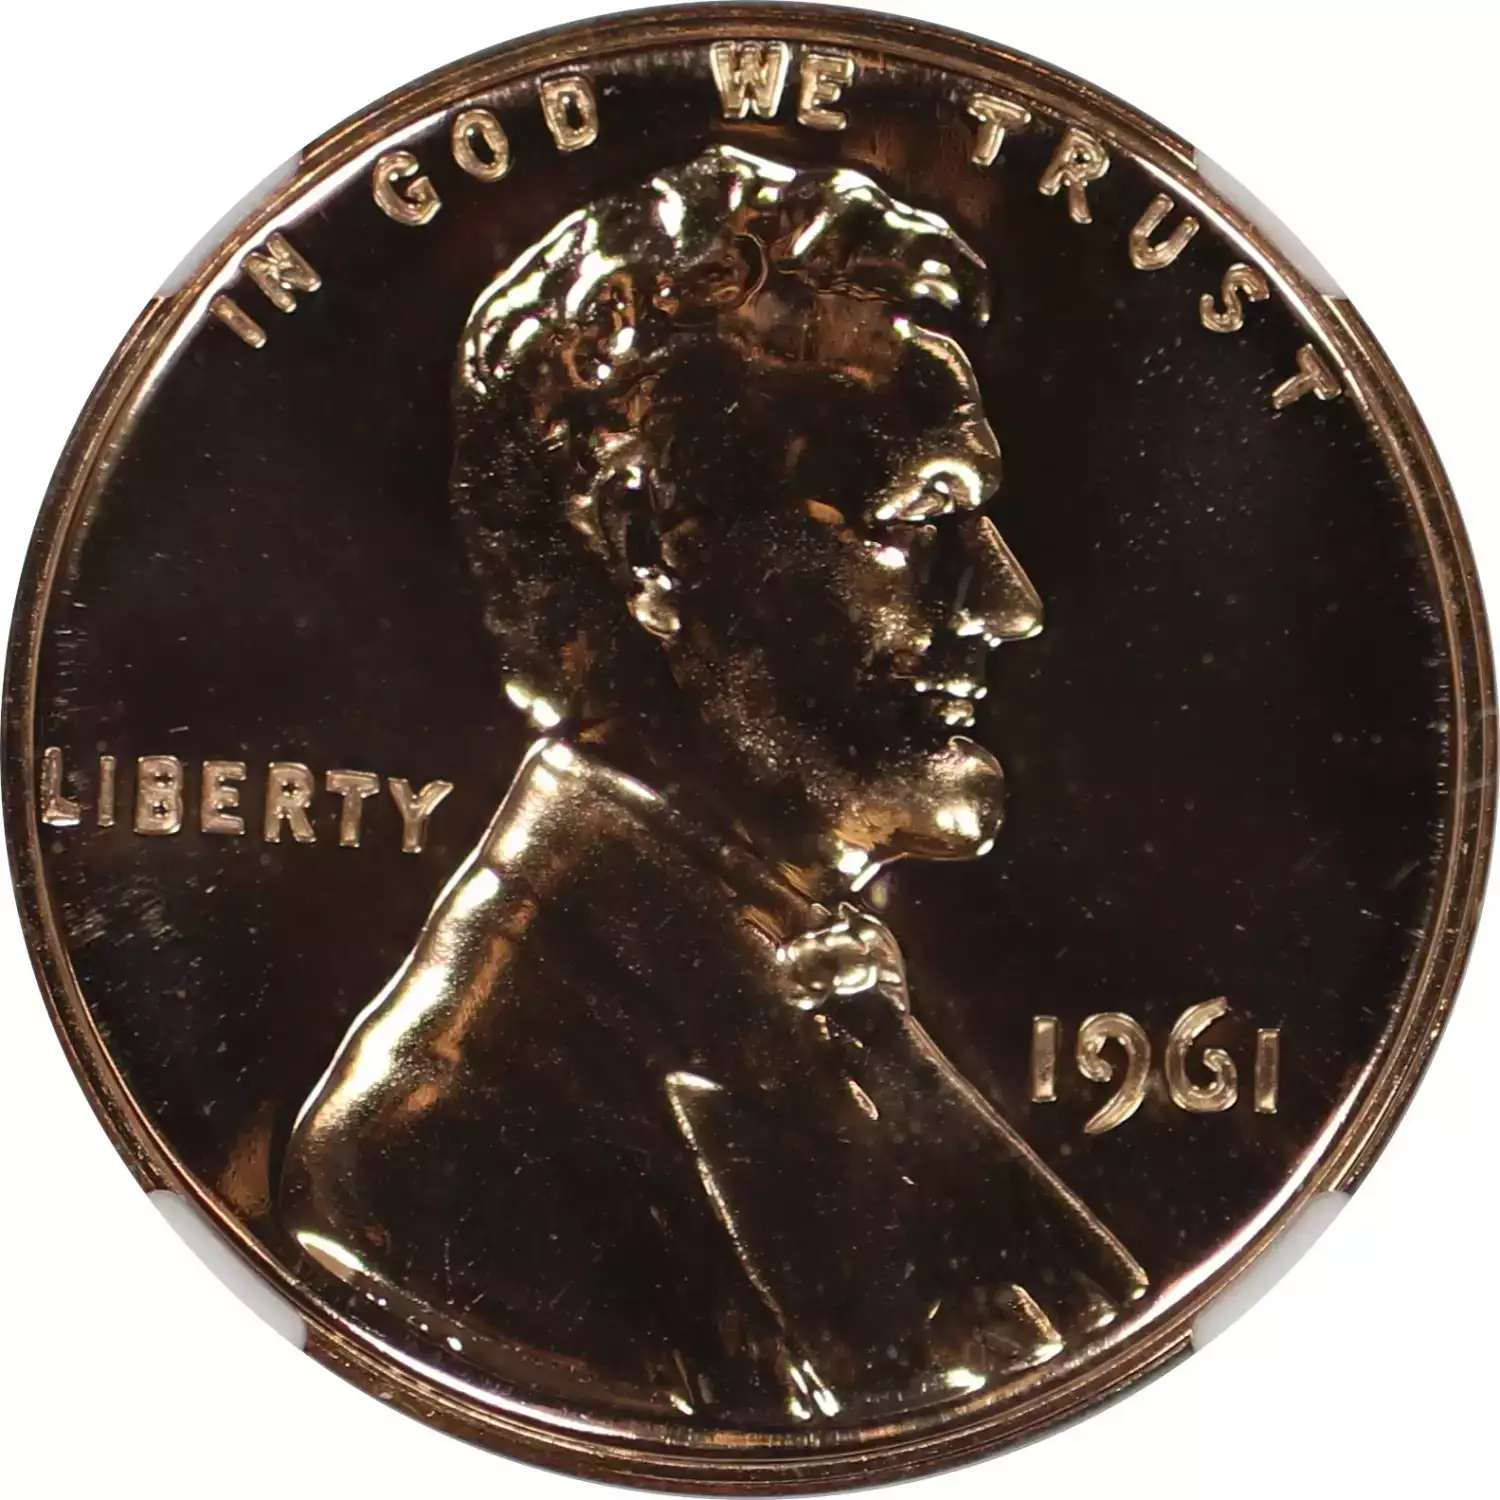 1961 PROOF LINCOLN MEMORIAL CENT PENNY 1C NGC CERTIFIED PF 68 RD (2)